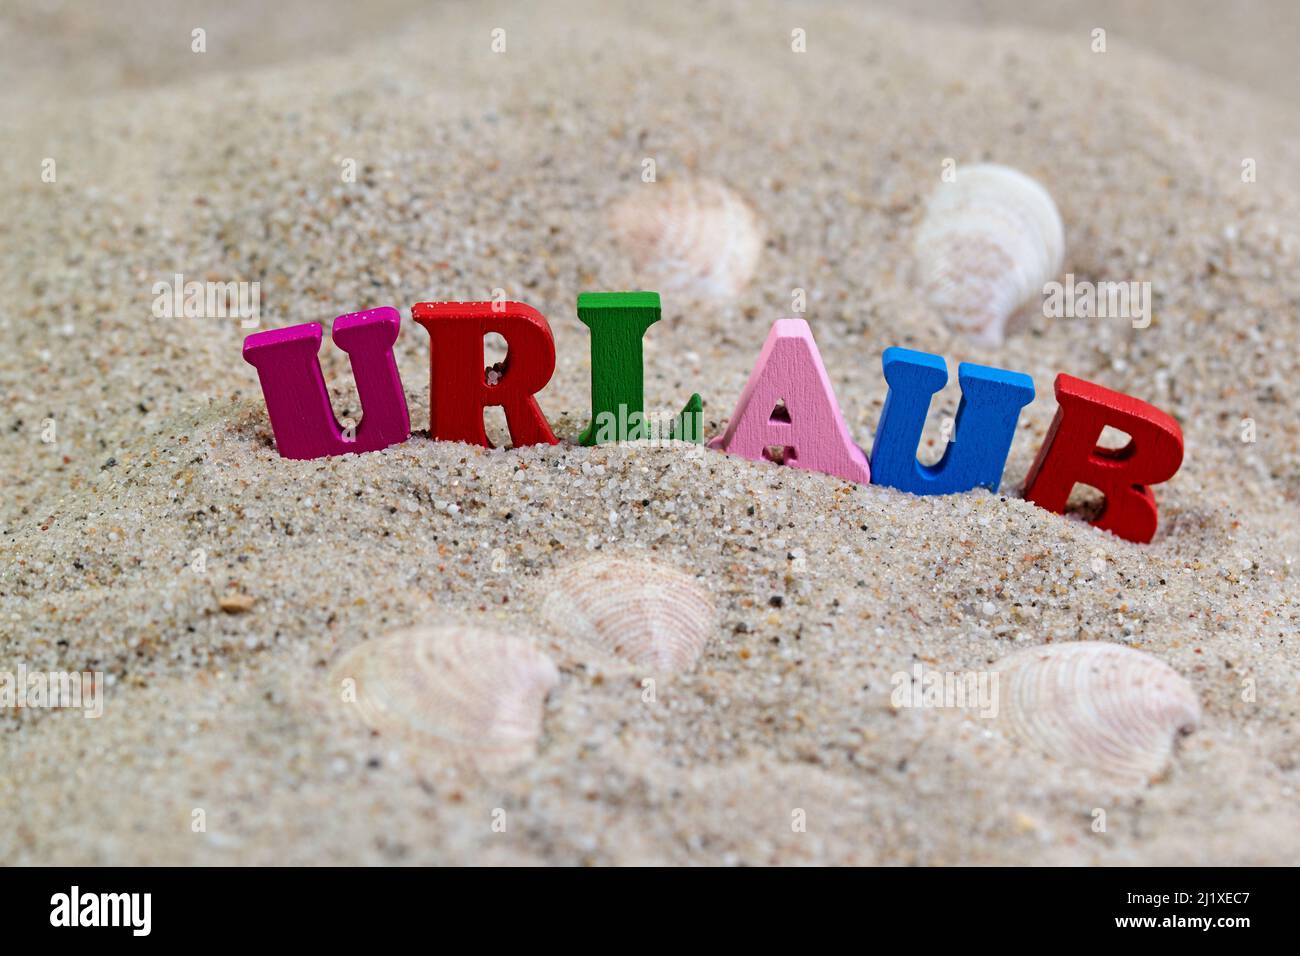 Colorful wooden letters in the sand with the text 'Urlaub', translation 'Vacation' Stock Photo